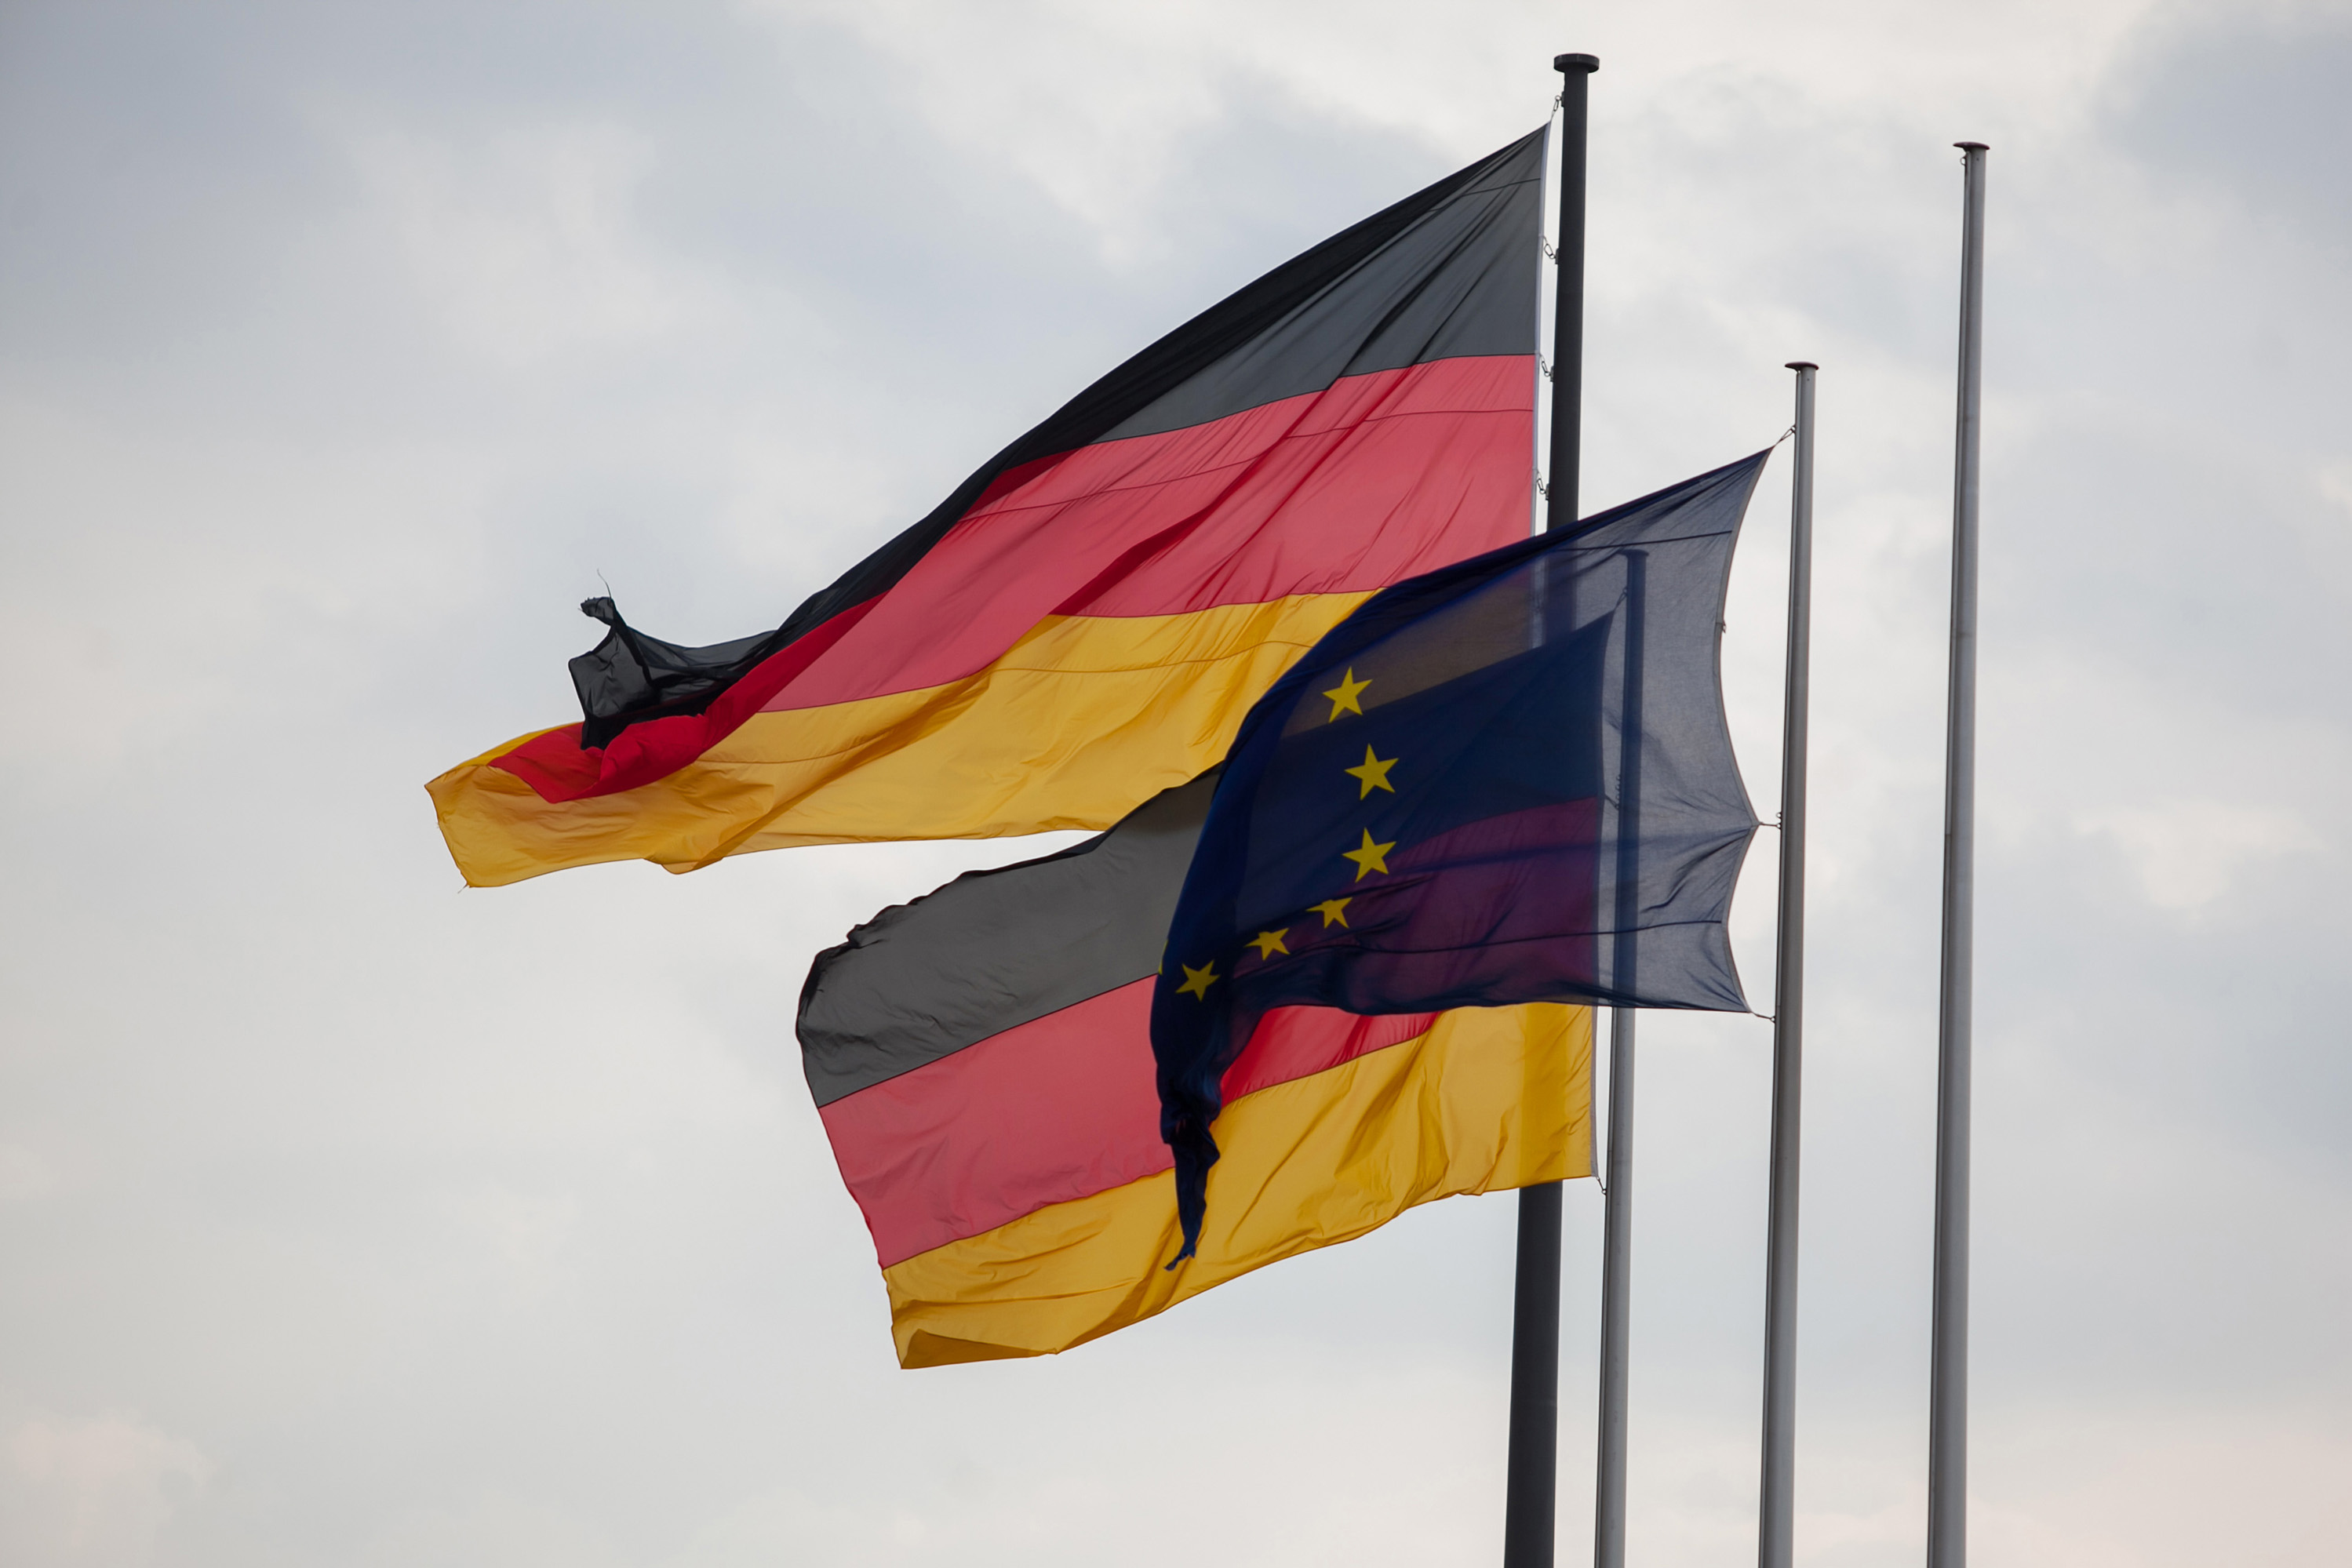 German Flags Fly next to a European Flag in Germany